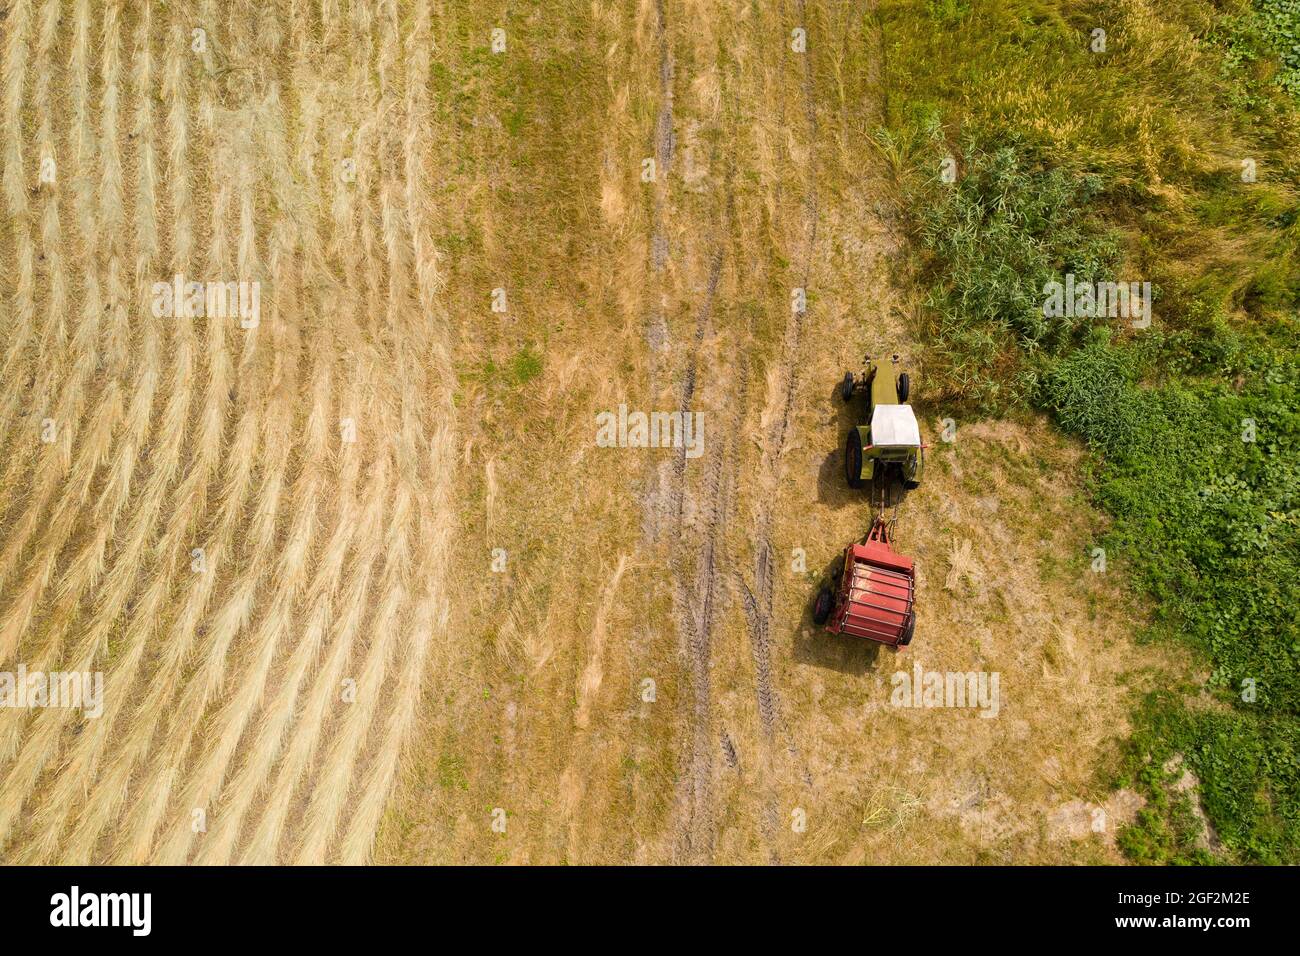 Tractor for making straw bales on harvested wheat field. Aerial view  Stock Photo